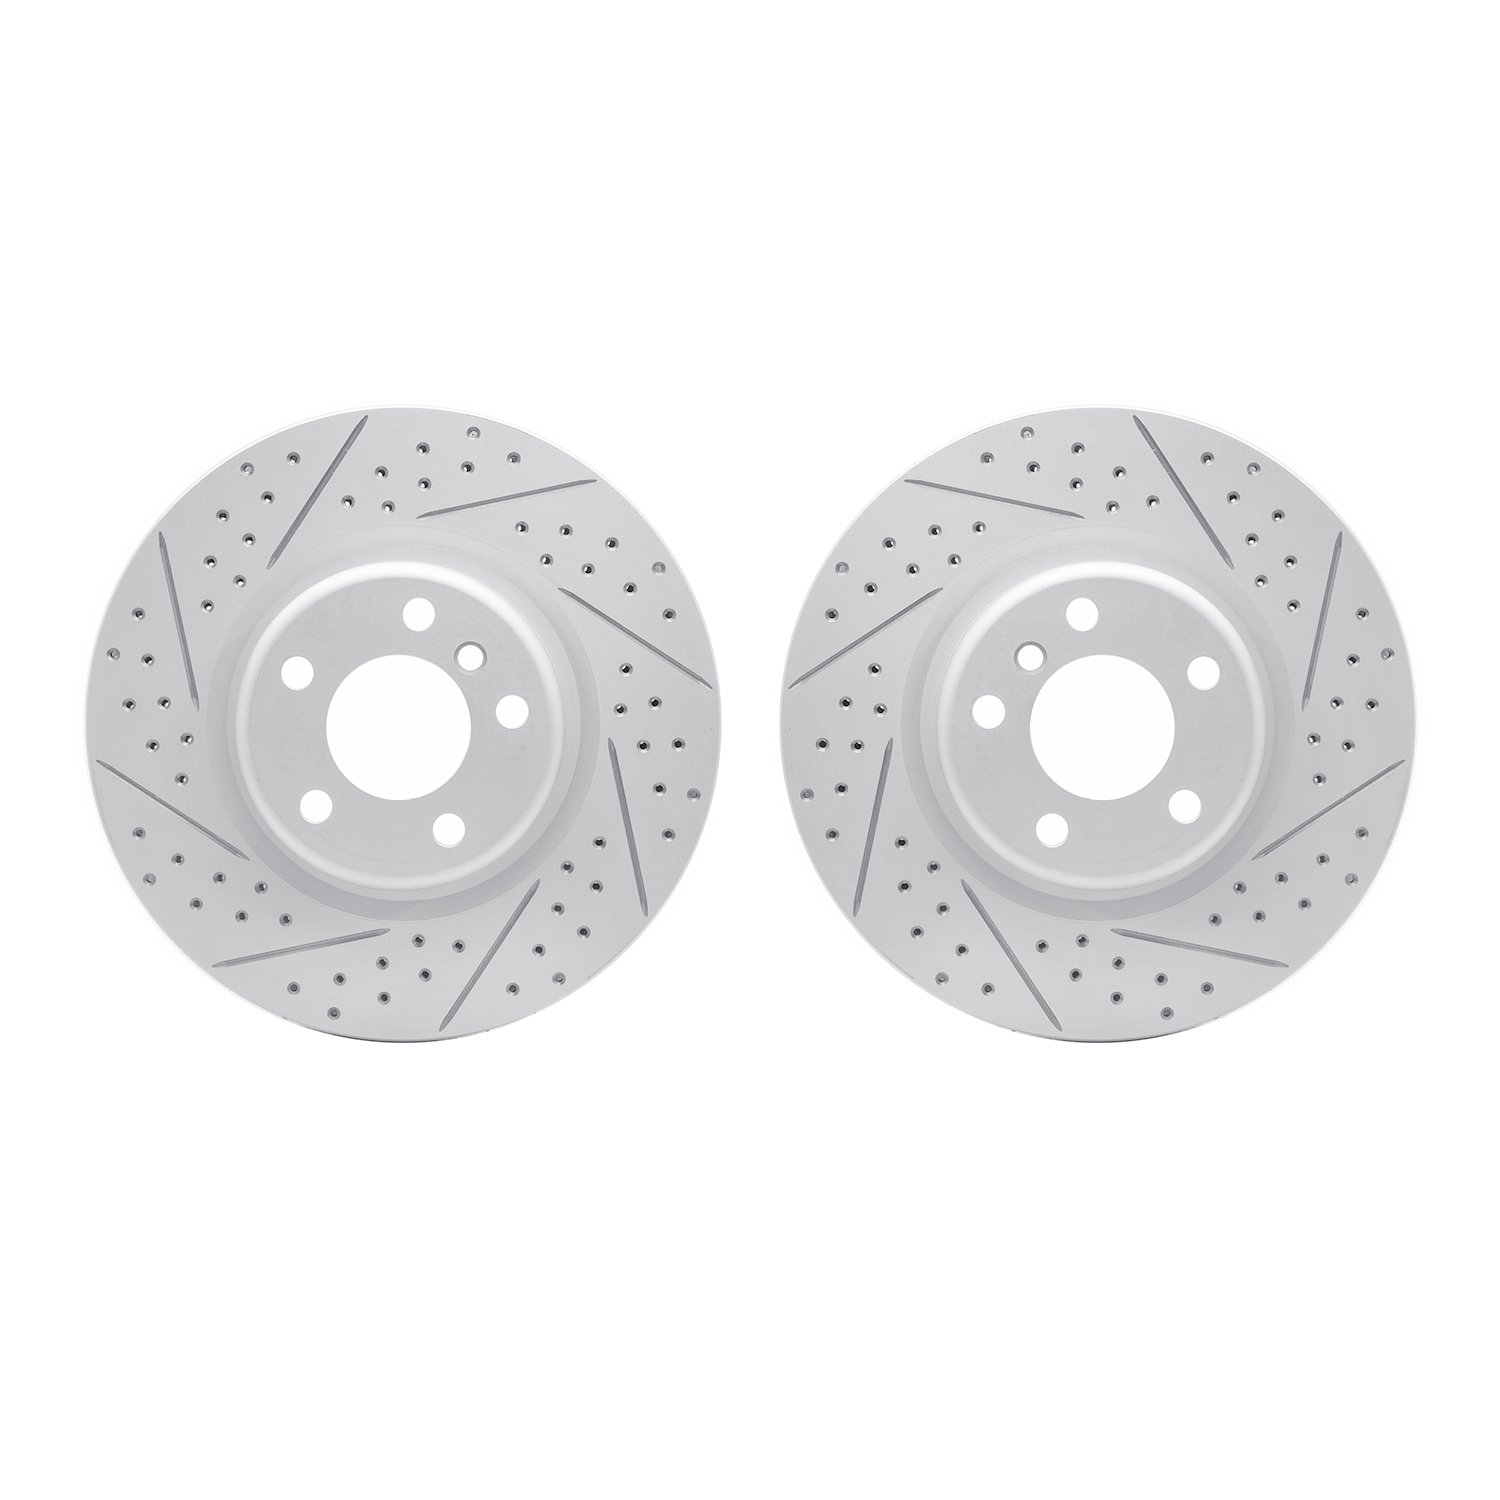 2002-31053 Geoperformance Drilled/Slotted Brake Rotors, 2012-2020 BMW, Position: Rear